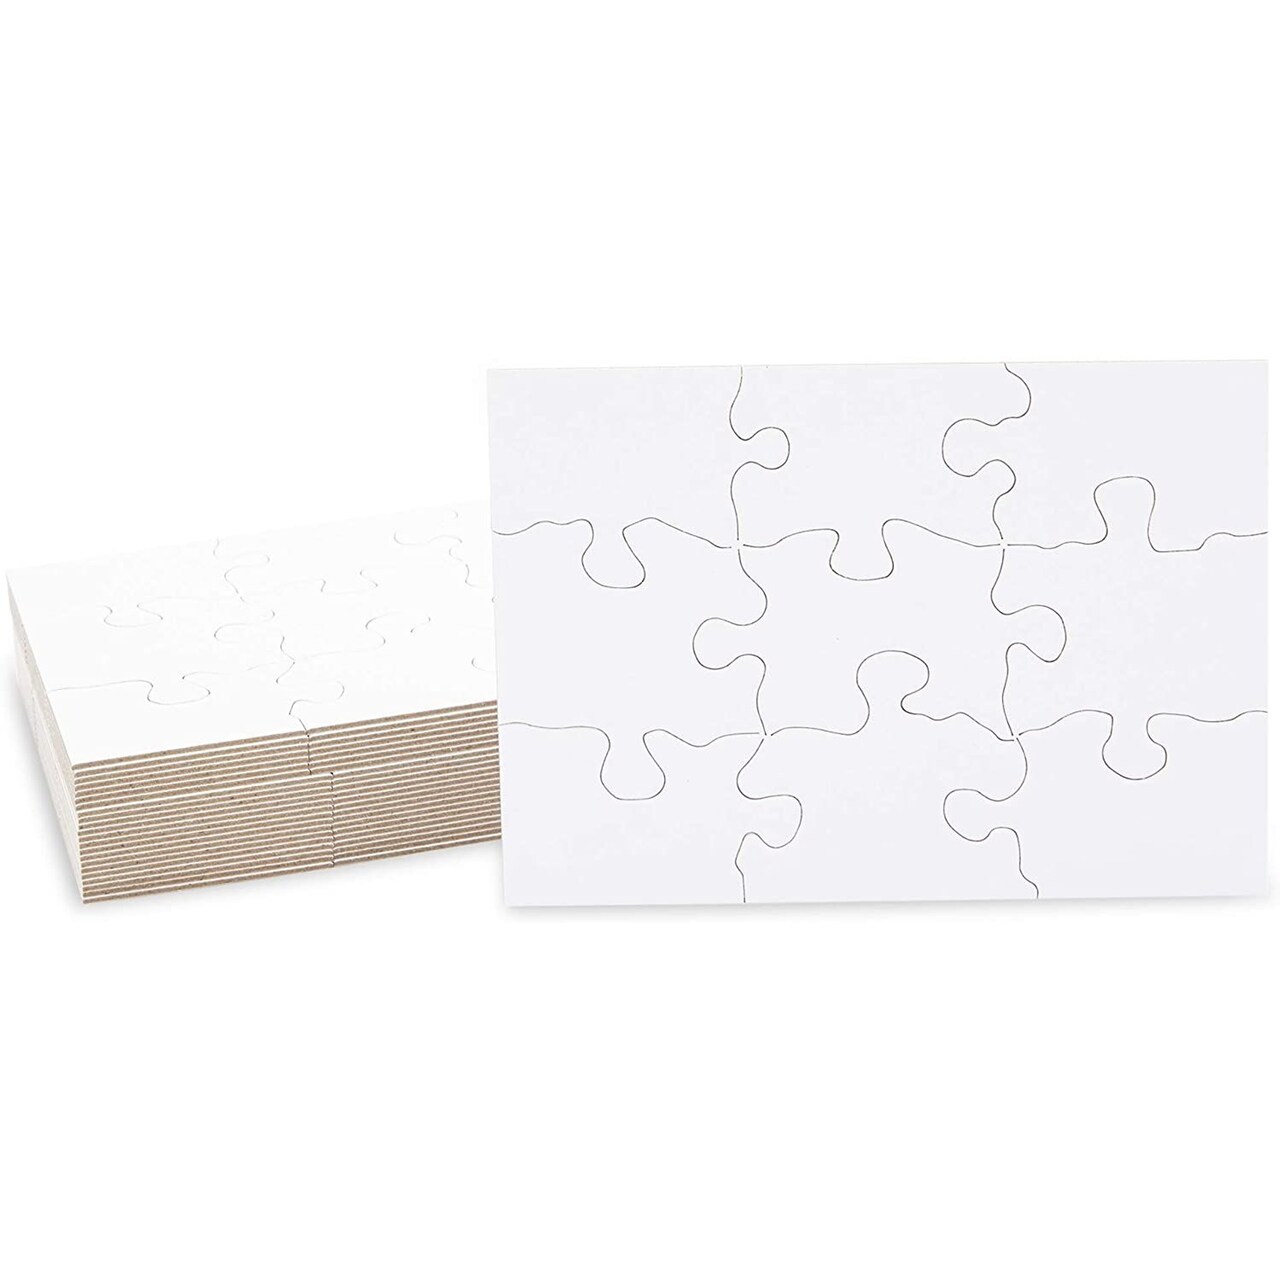 24 Sheets Blank Puzzles to Draw On Bulk, 5.5 x 4 Inch Jigsaw Puzzle Pieces  for DIY, Arts and Crafts Projects